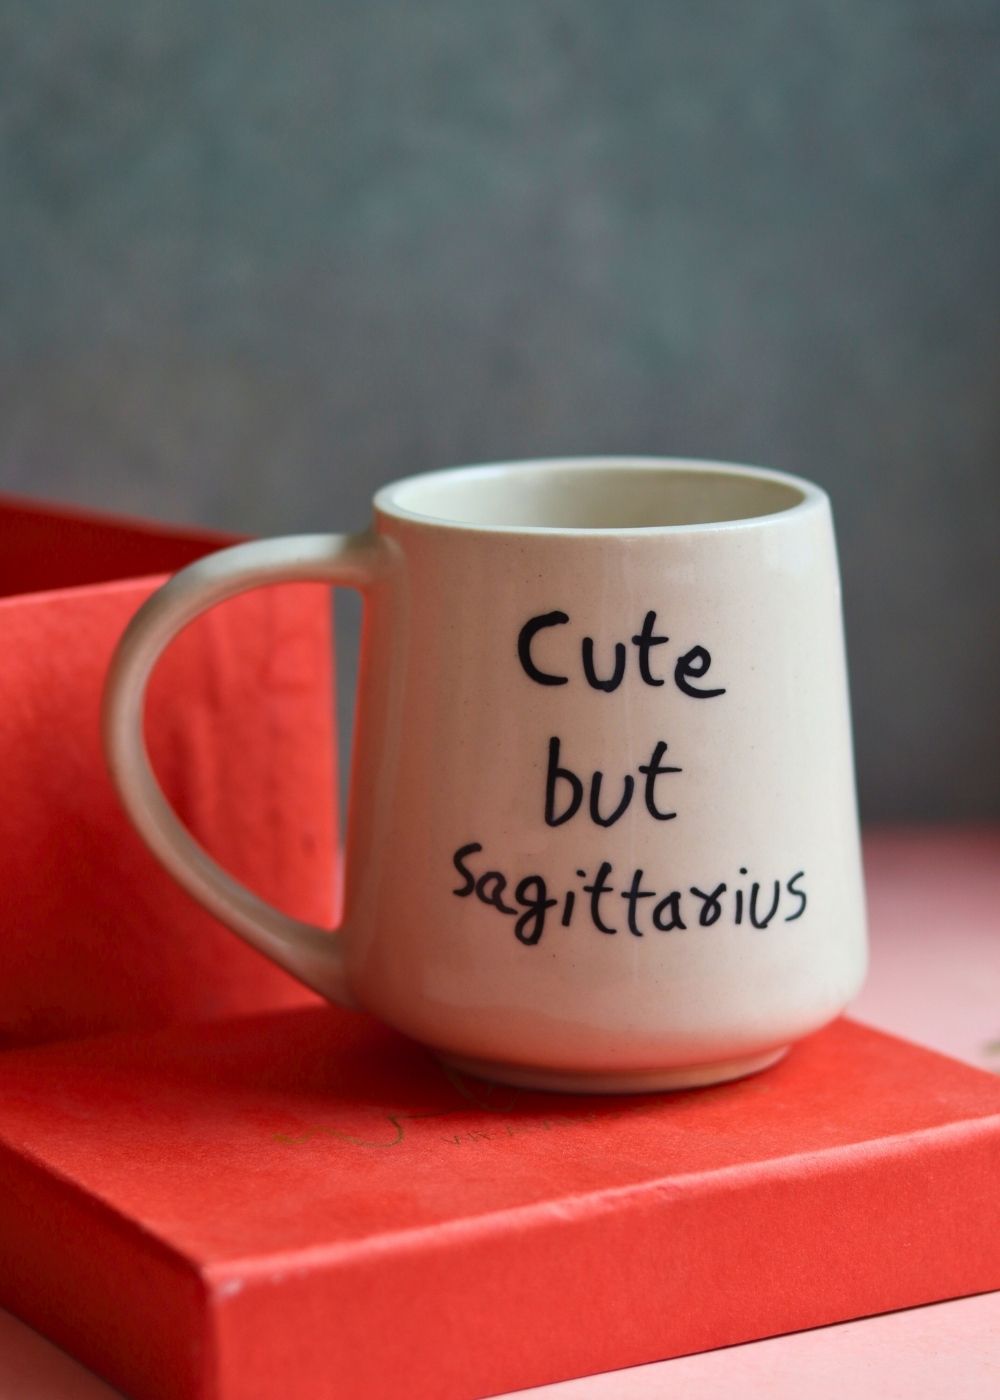 cute but sagittarius mug in a gift box for your daily coffee routine 